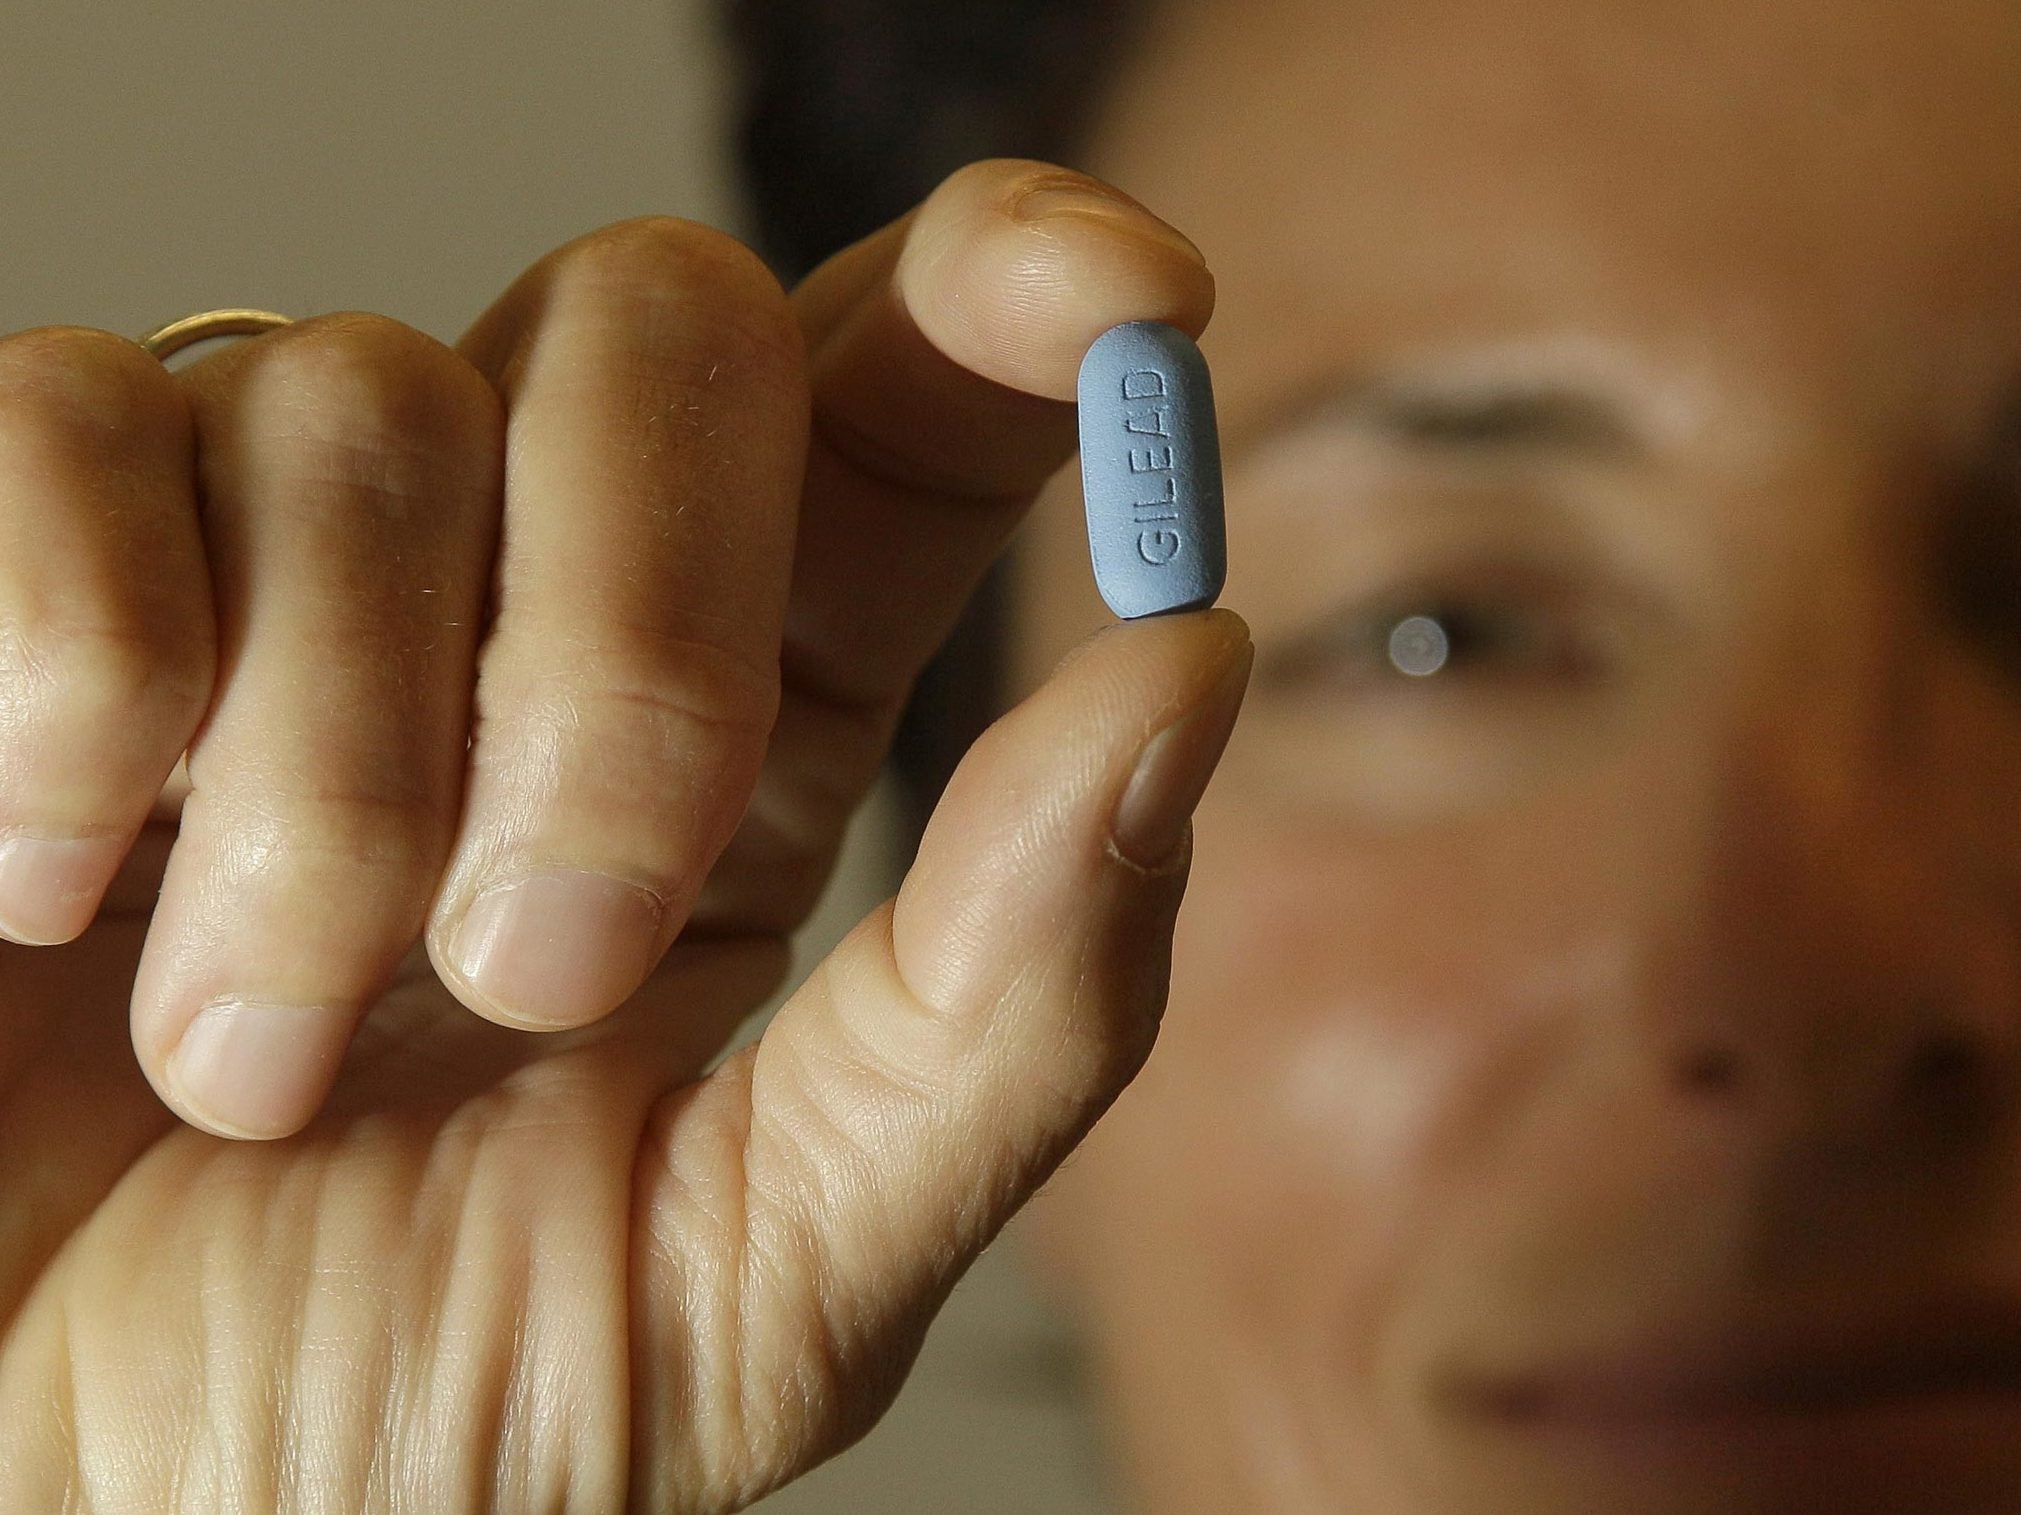 Researchers prescribed Truvada, an antiretro viral drug used to treat HIV